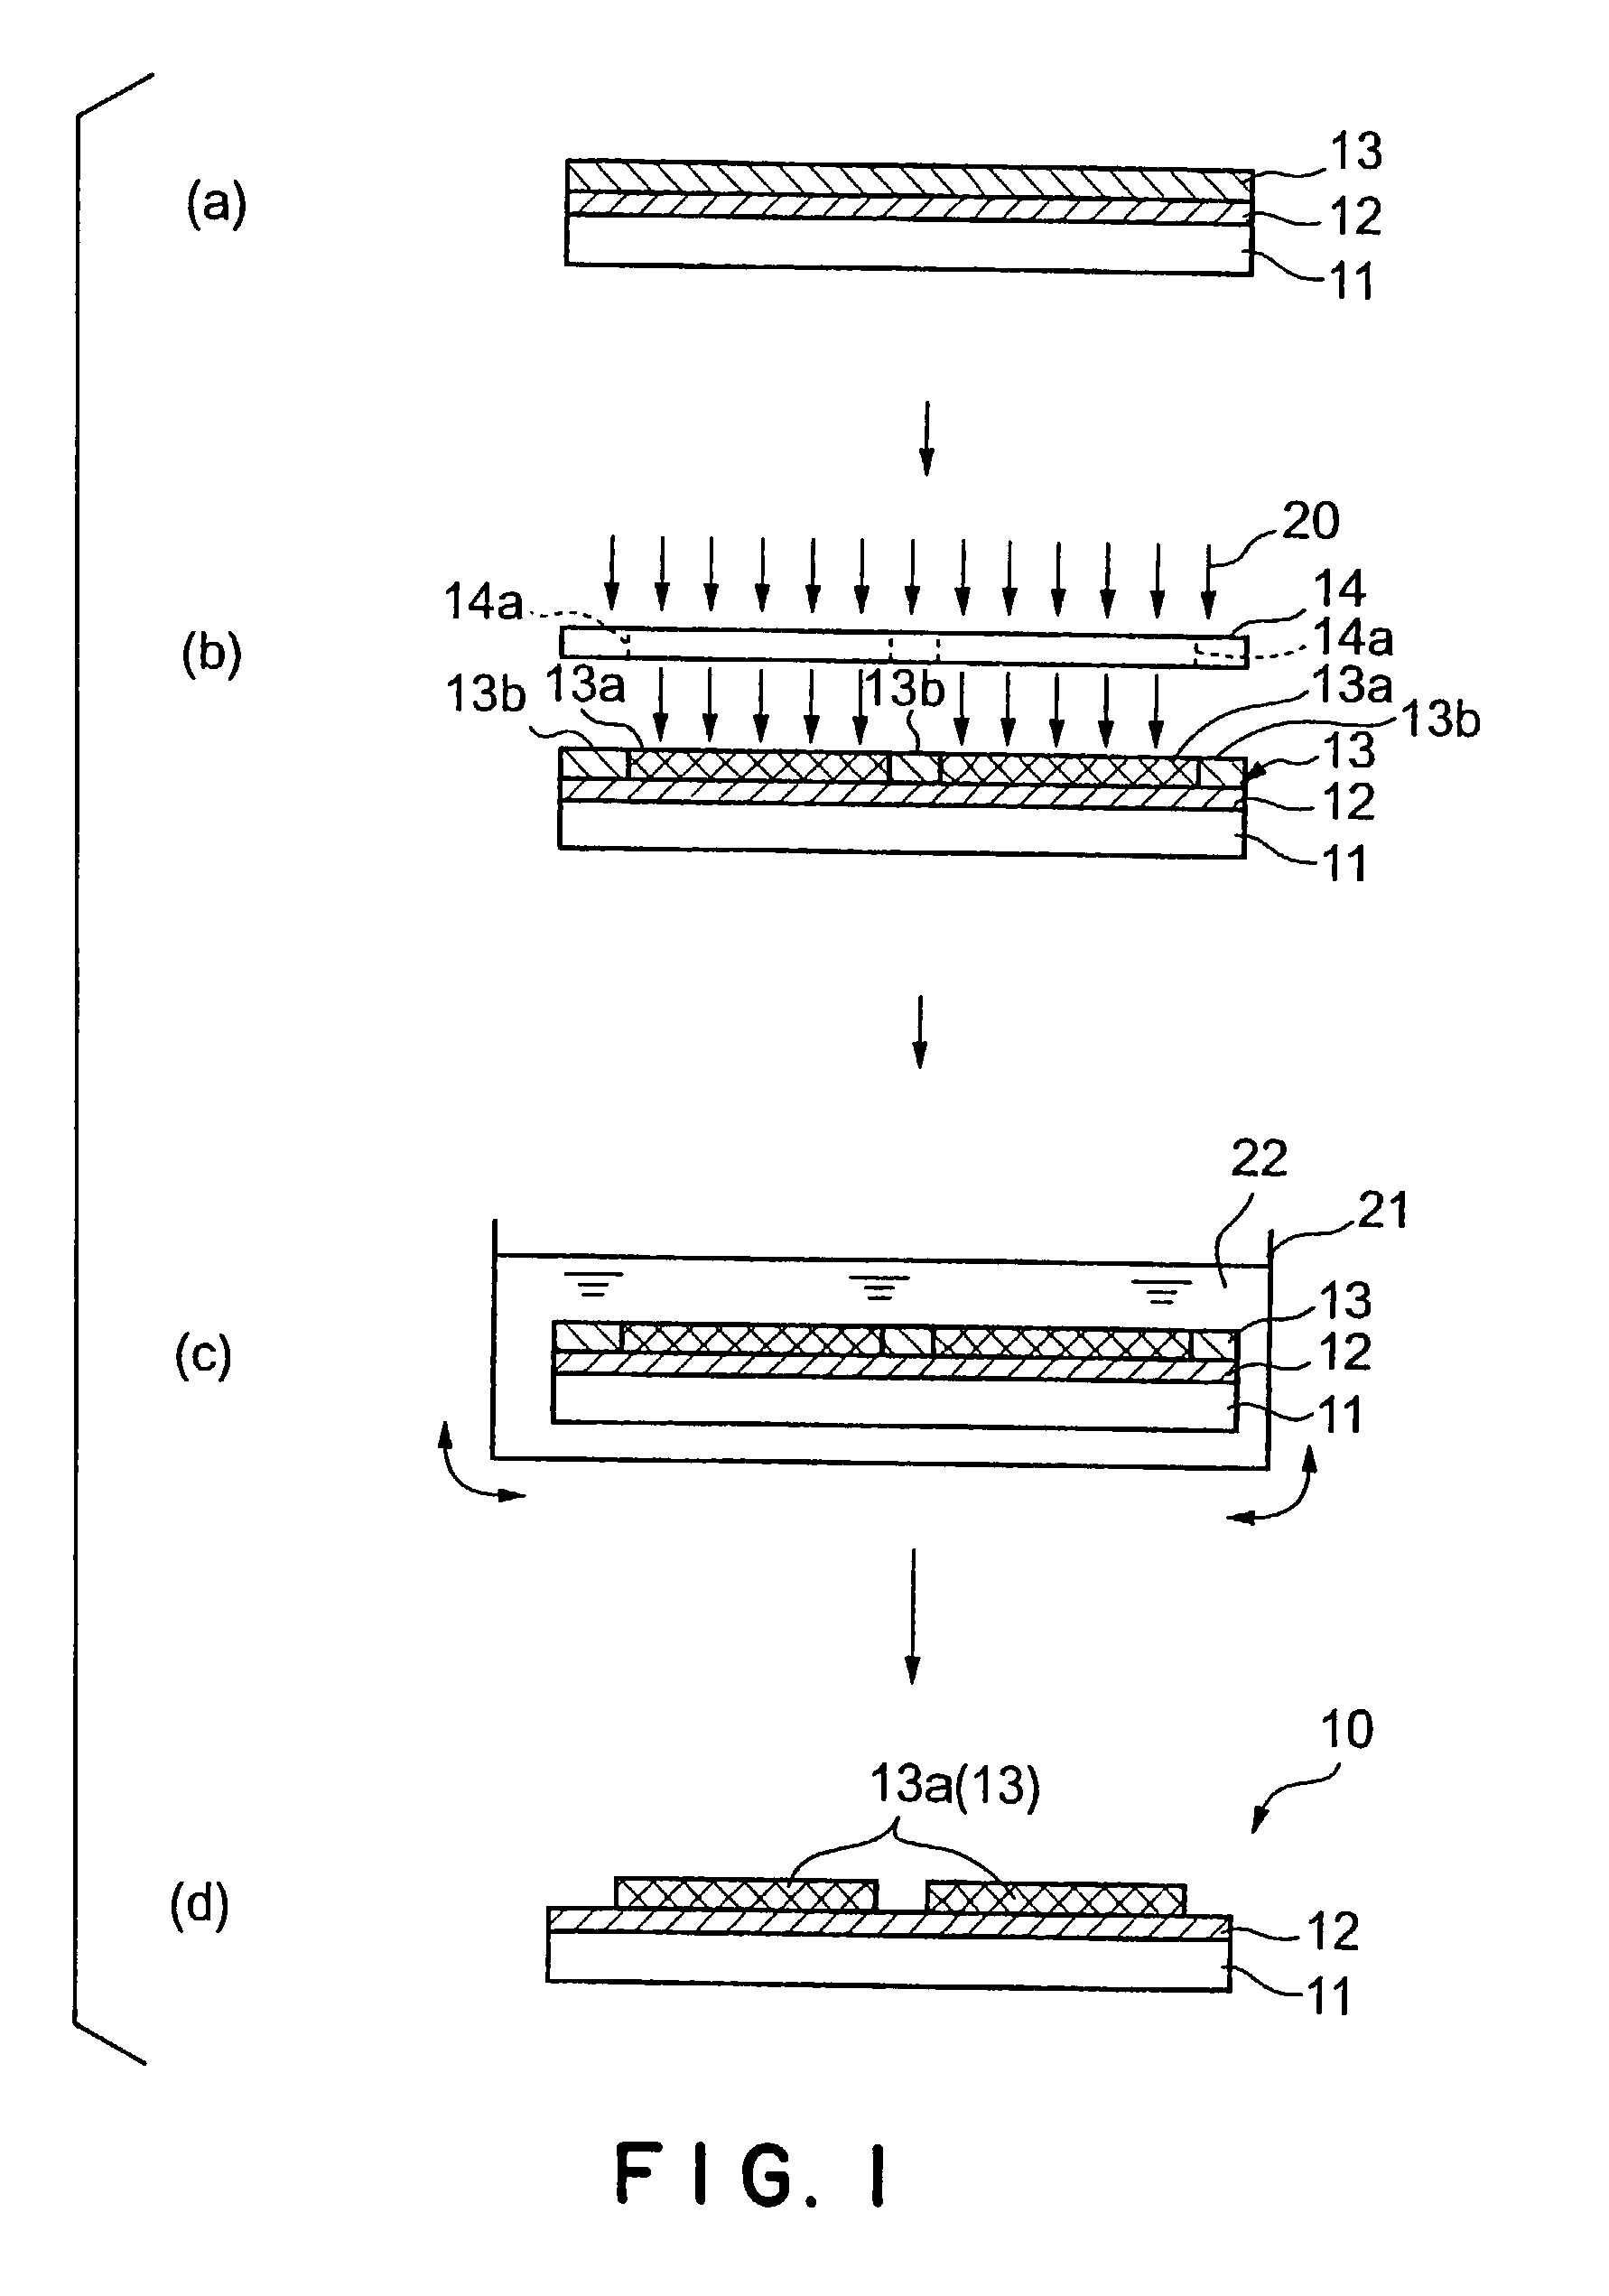 Method of producing optical element by patterning liquid crystal films